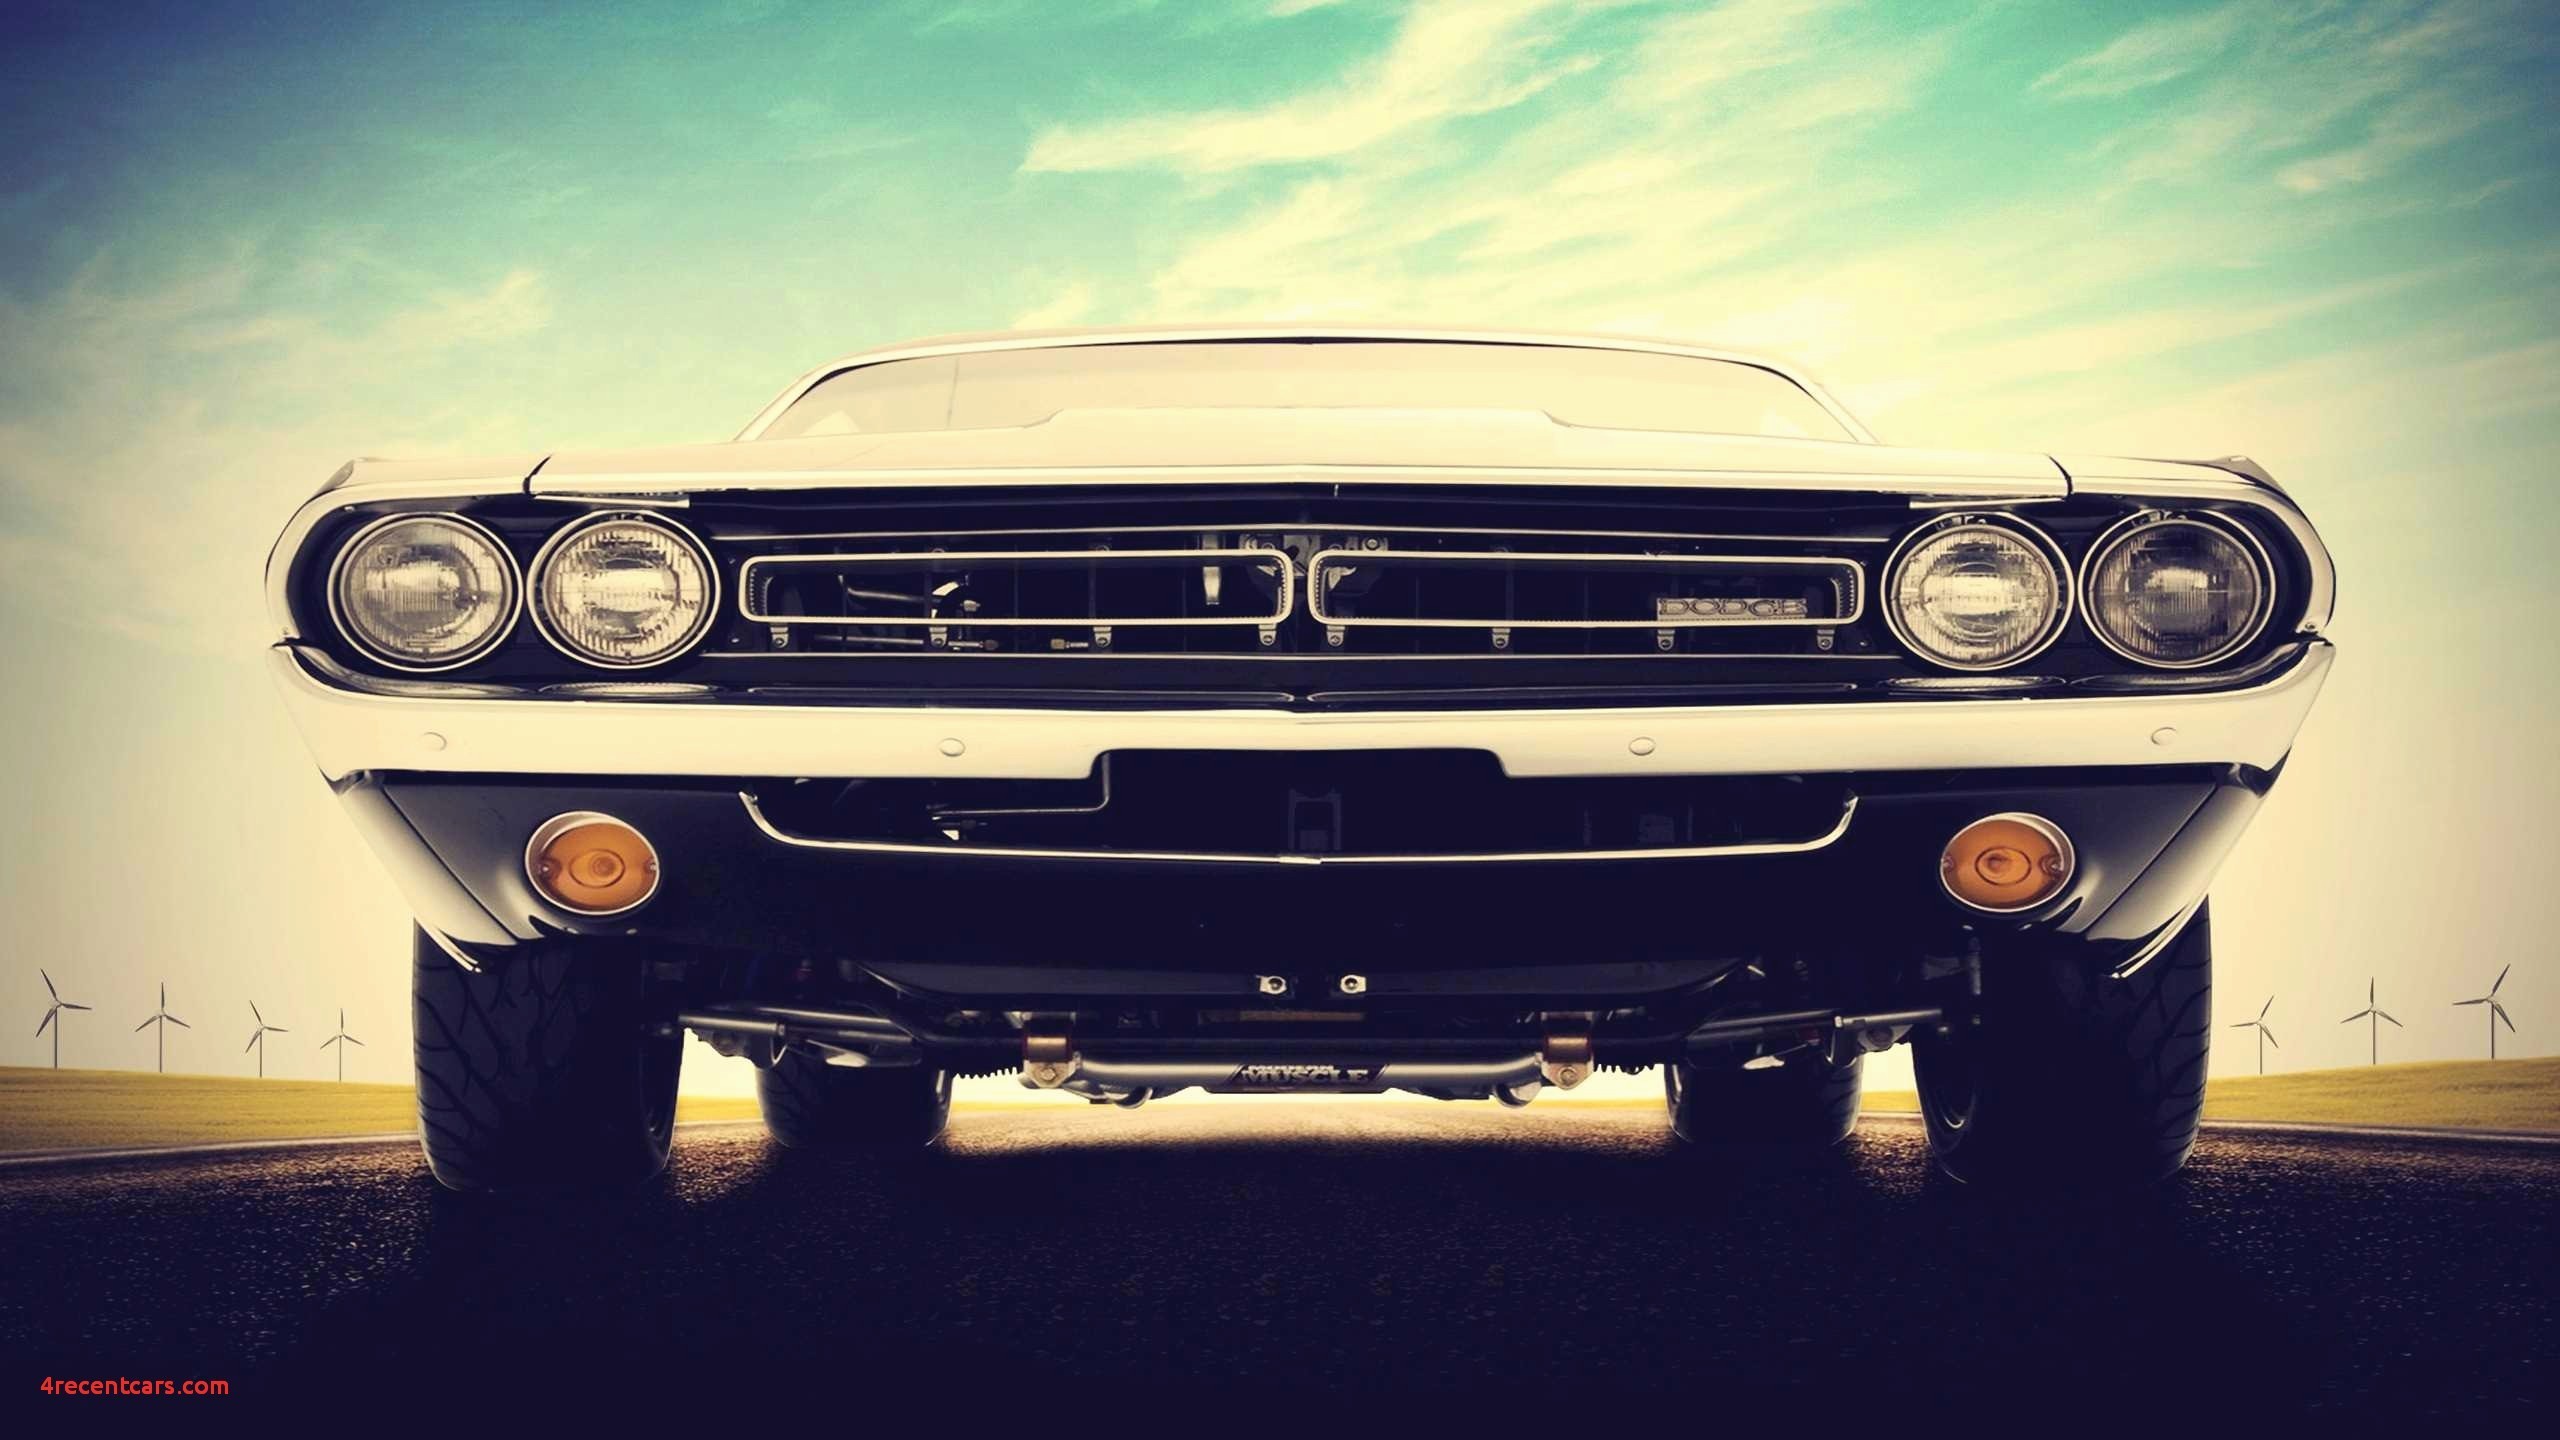 classic hd wallpapers for mobile,land vehicle,vehicle,car,bumper,muscle car